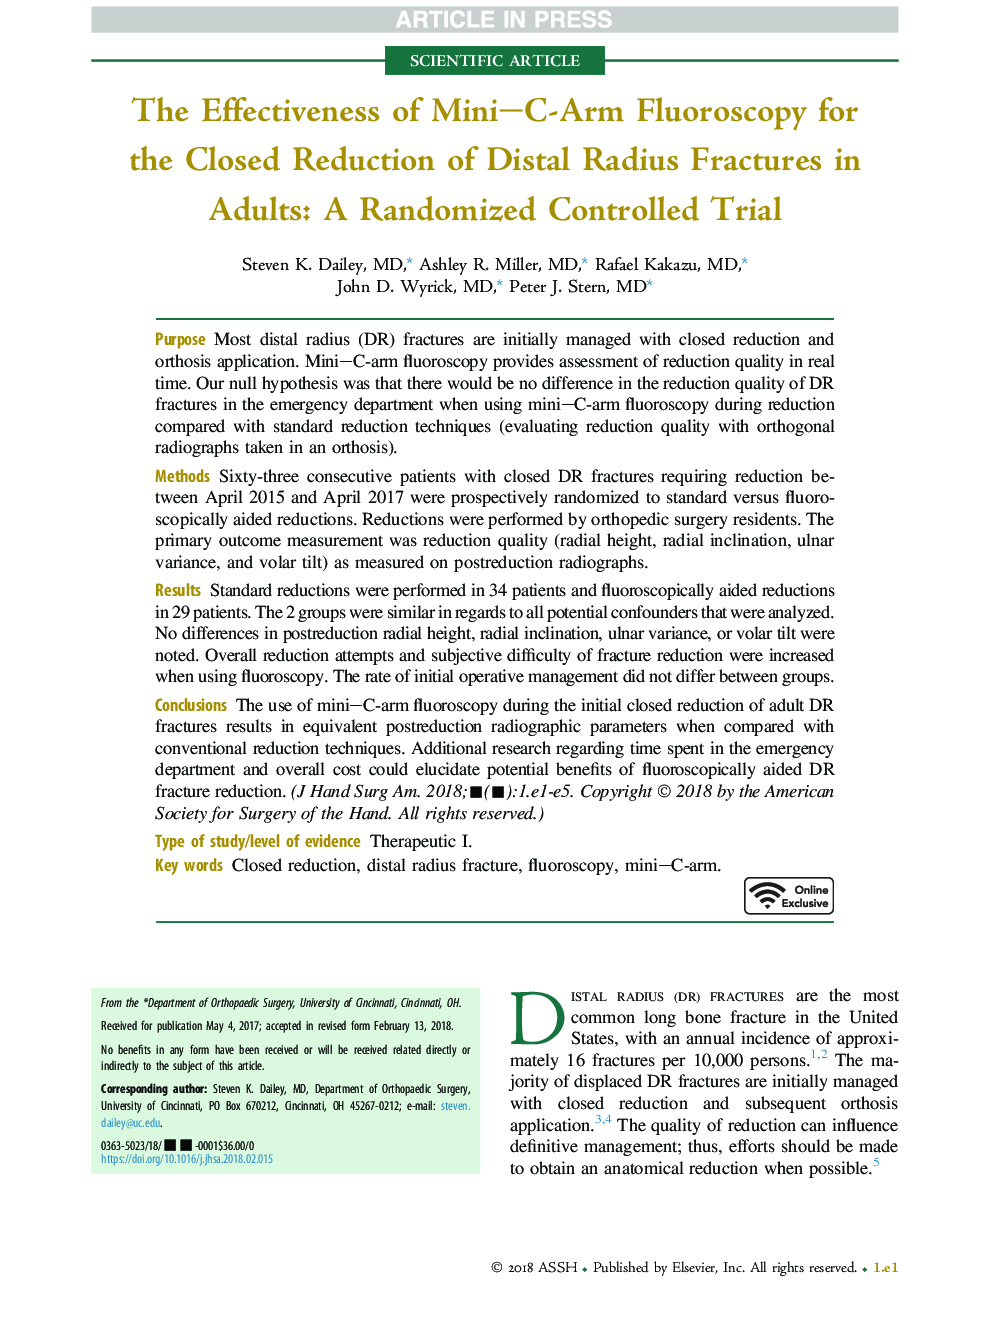 The Effectiveness of Mini-C-Arm Fluoroscopy for theÂ Closed Reduction of Distal Radius Fractures in Adults: A Randomized Controlled Trial